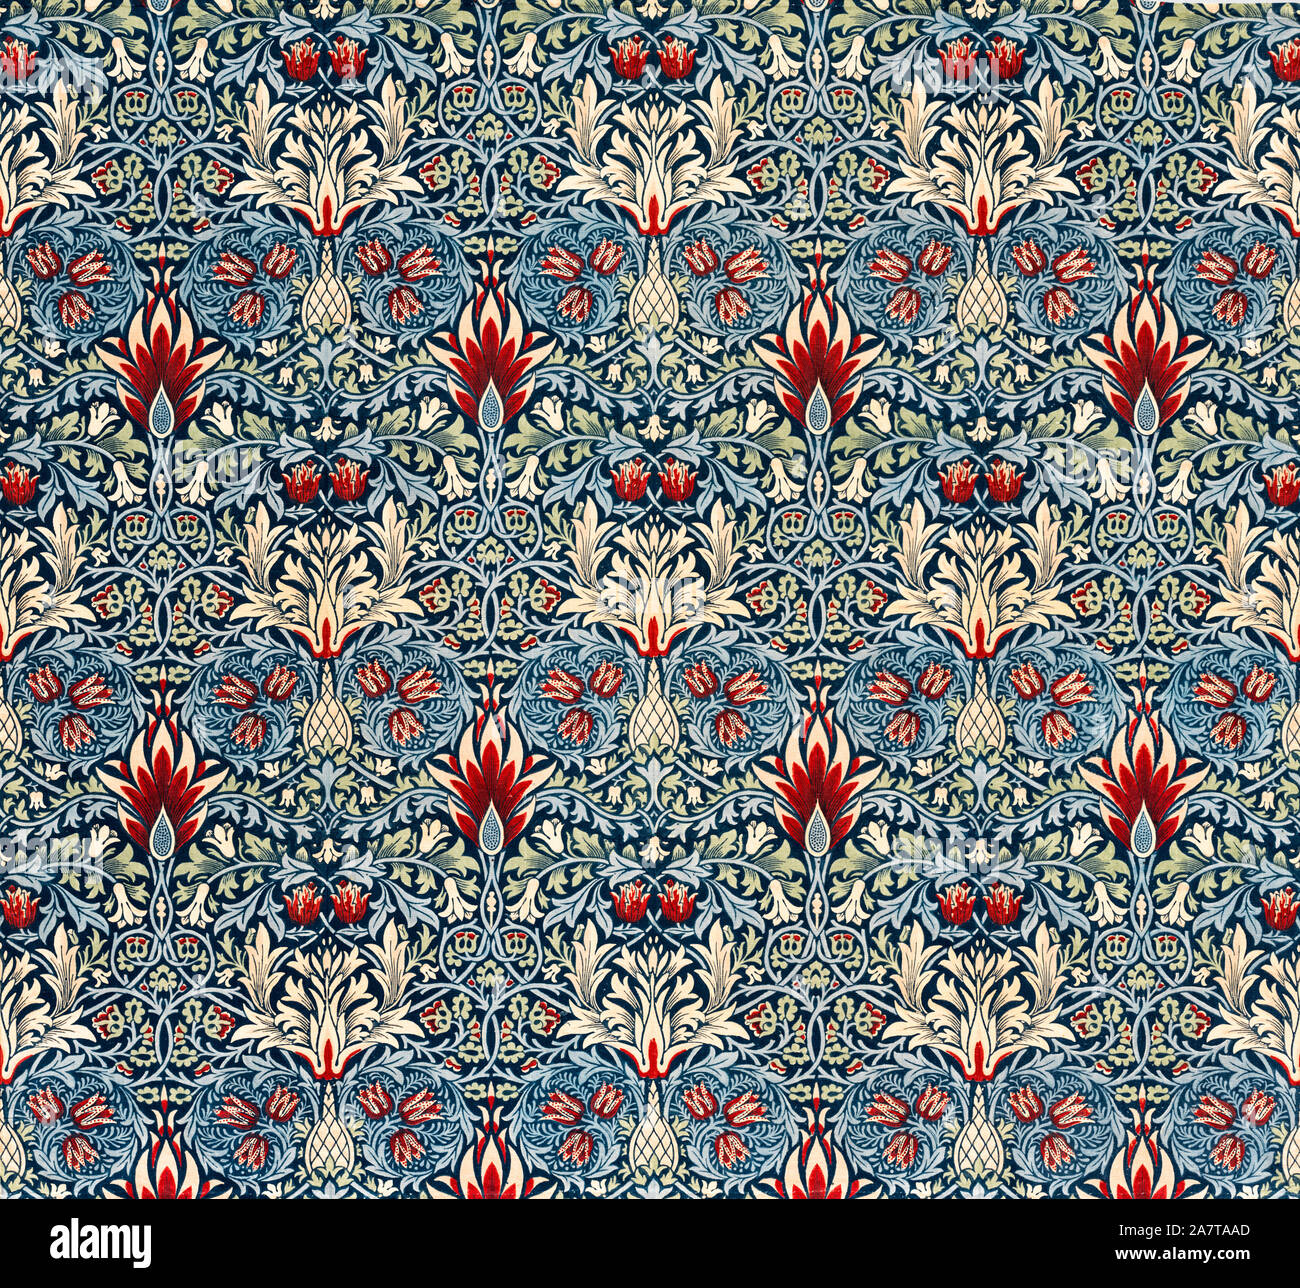 William Morris, Fabric Pattern, Snakeshead, 1920, Arts and Crafts Movement Stock Photo